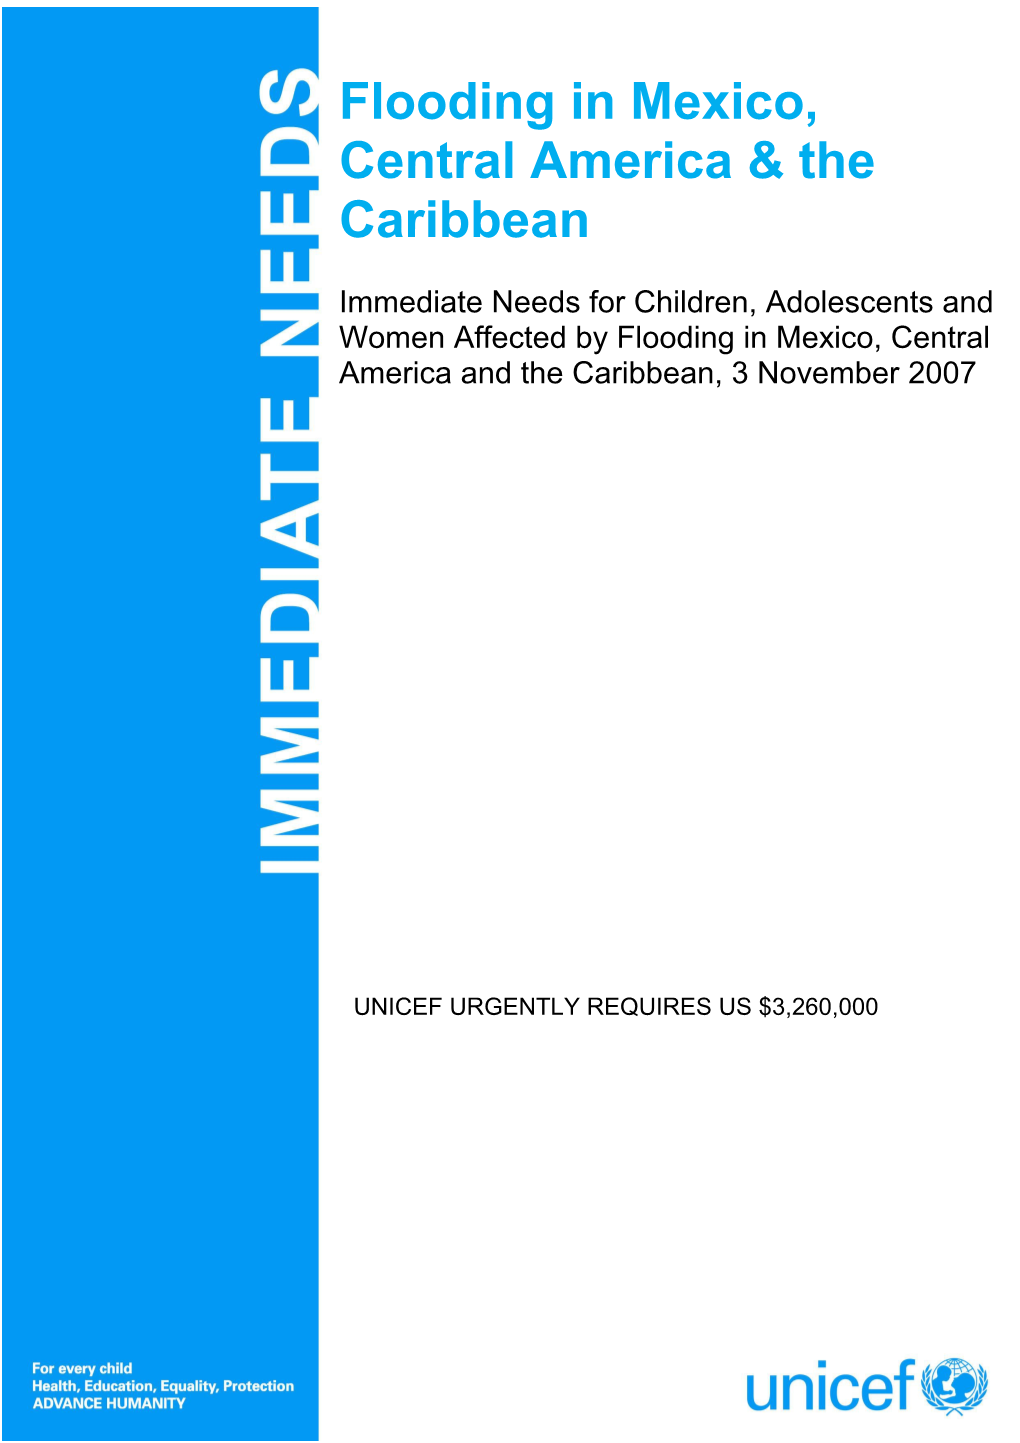 1.Critical Issues for Children